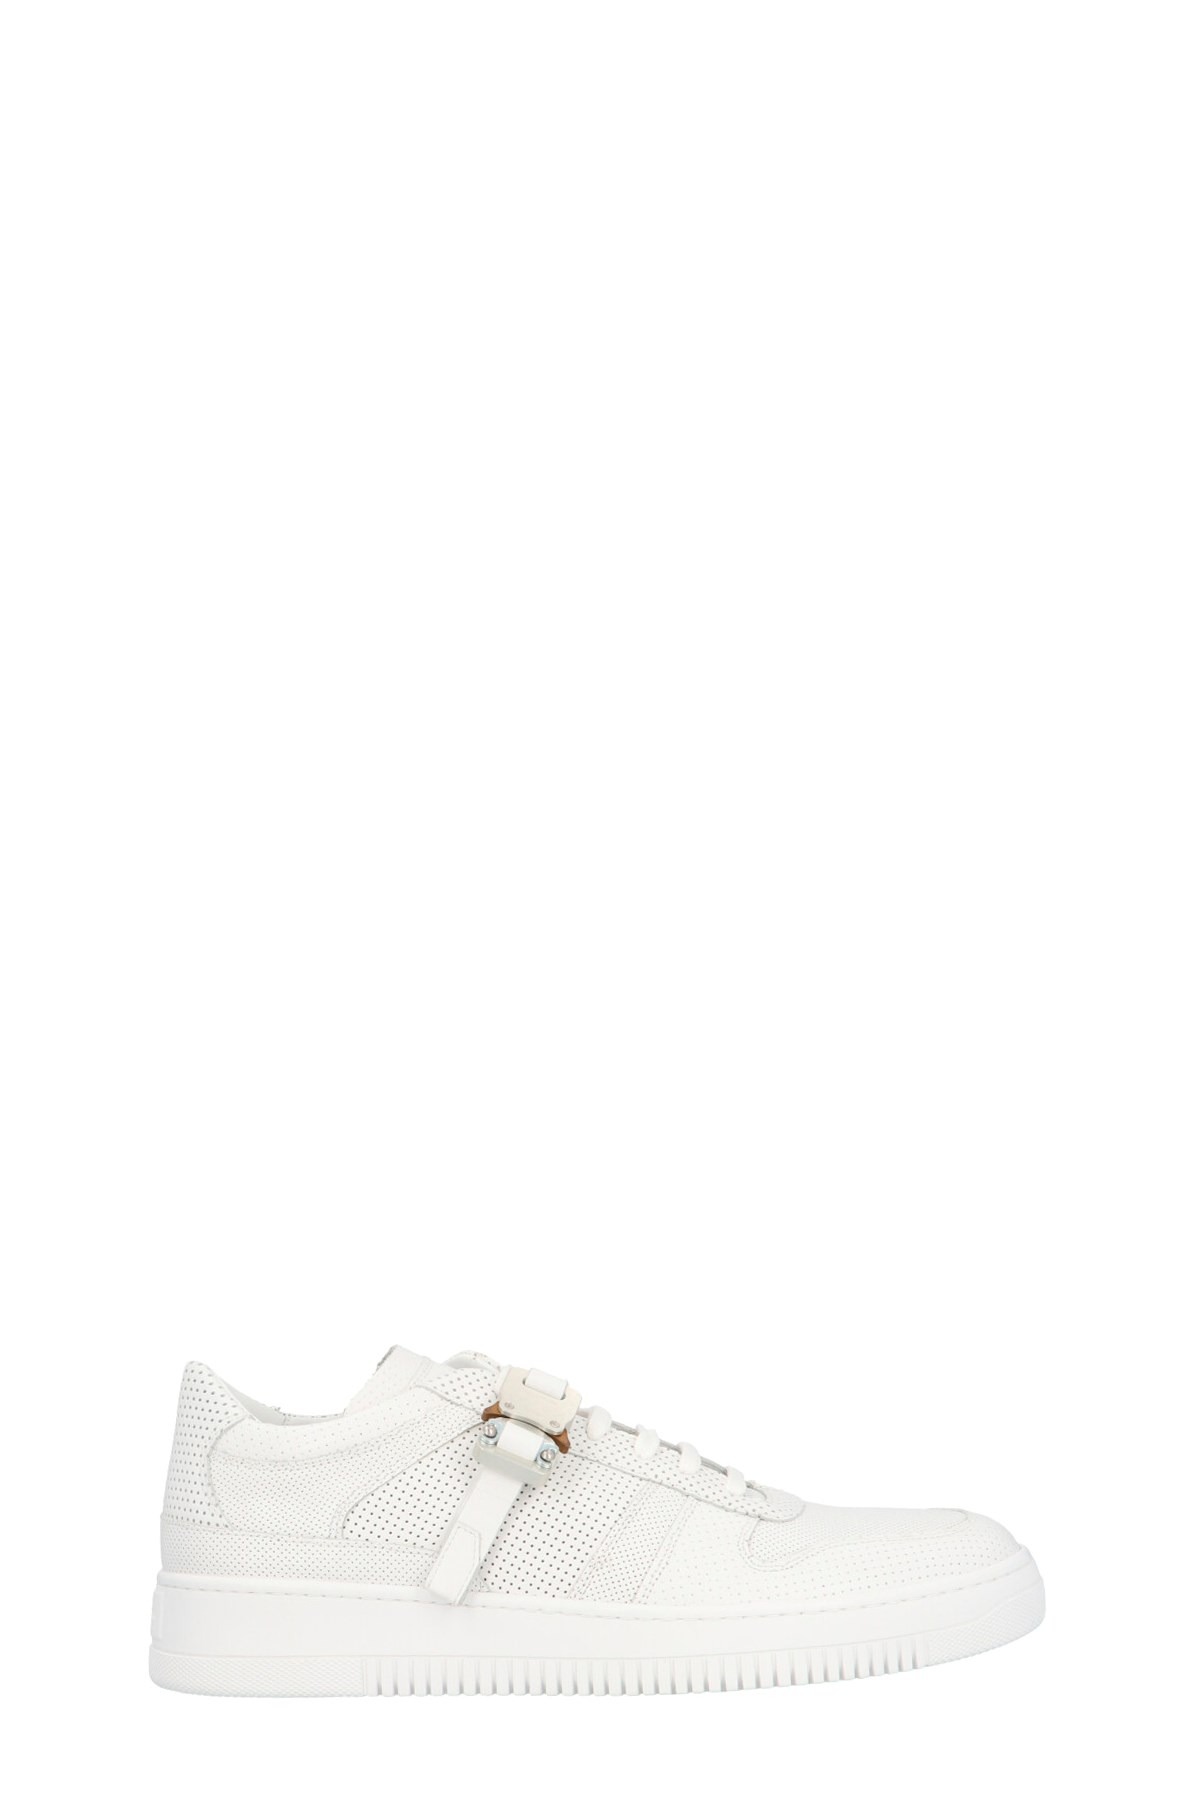 1017-ALYX-9SM 'Buckle Low Trainer’ Sneakers